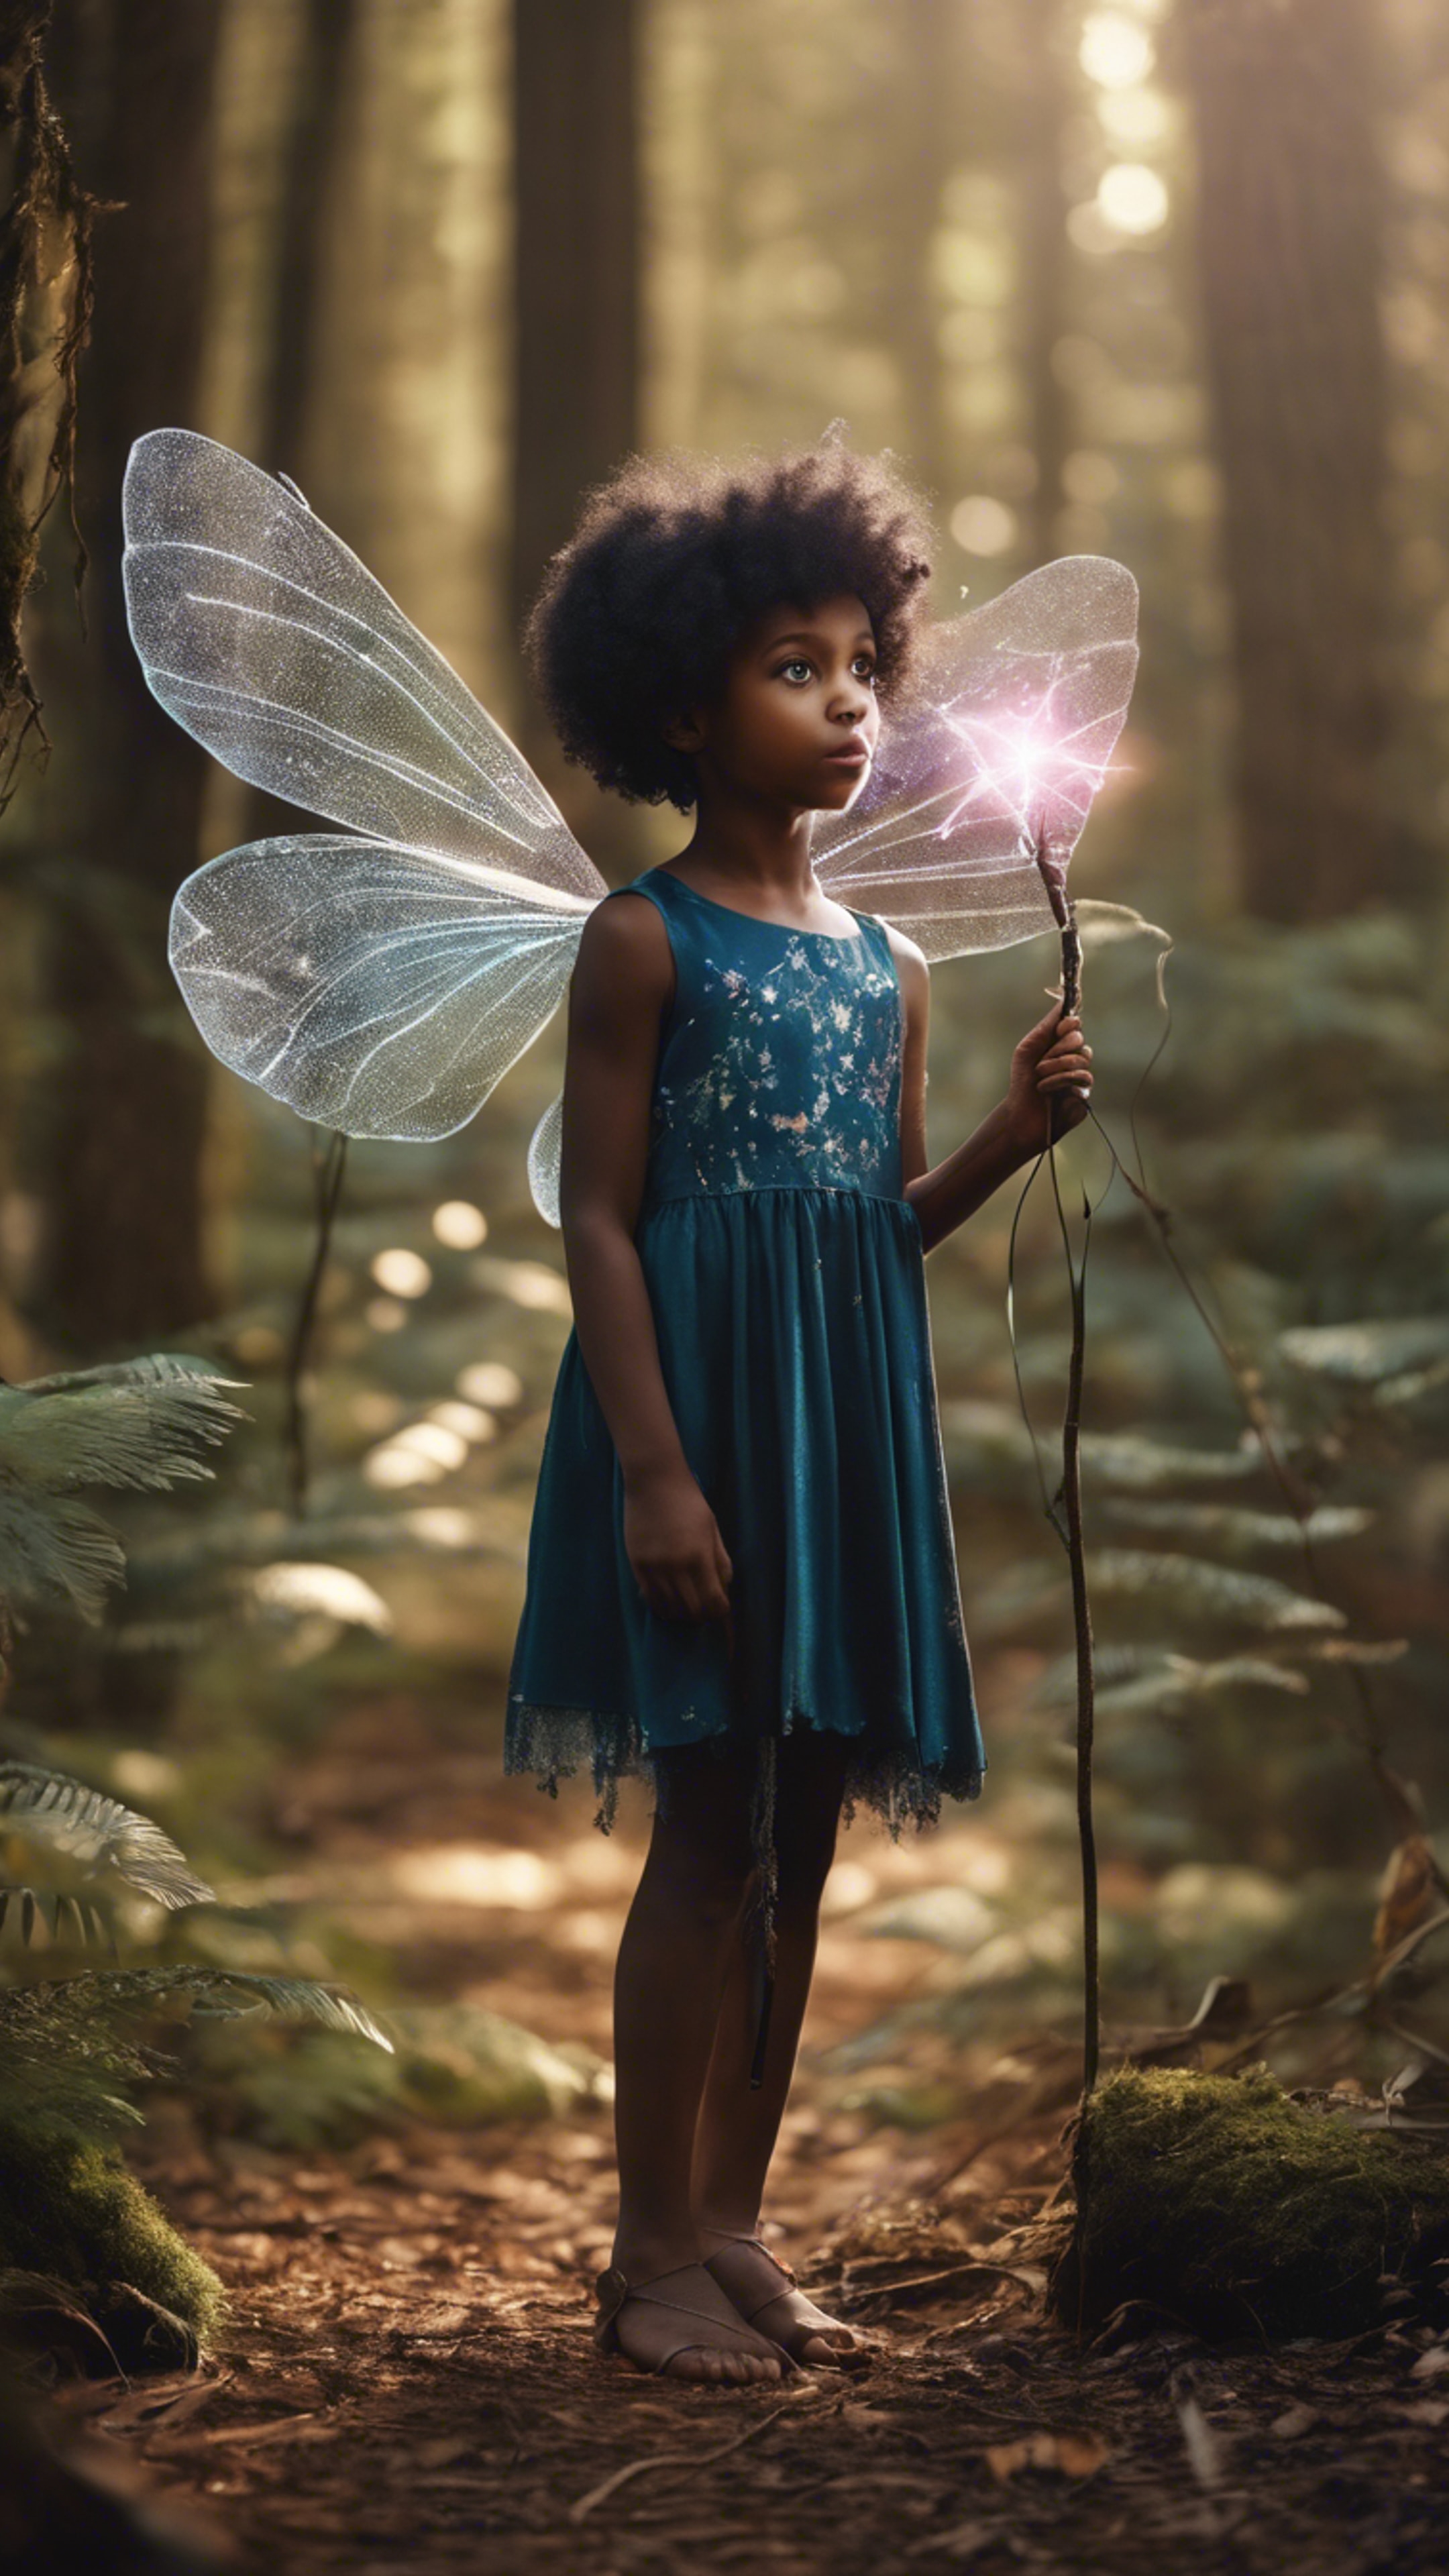 A cute image of a black girl wearing fairy wings, holding a magic wand in a mystical forest. ផ្ទាំង​រូបភាព[6c77347a4892474c928d]